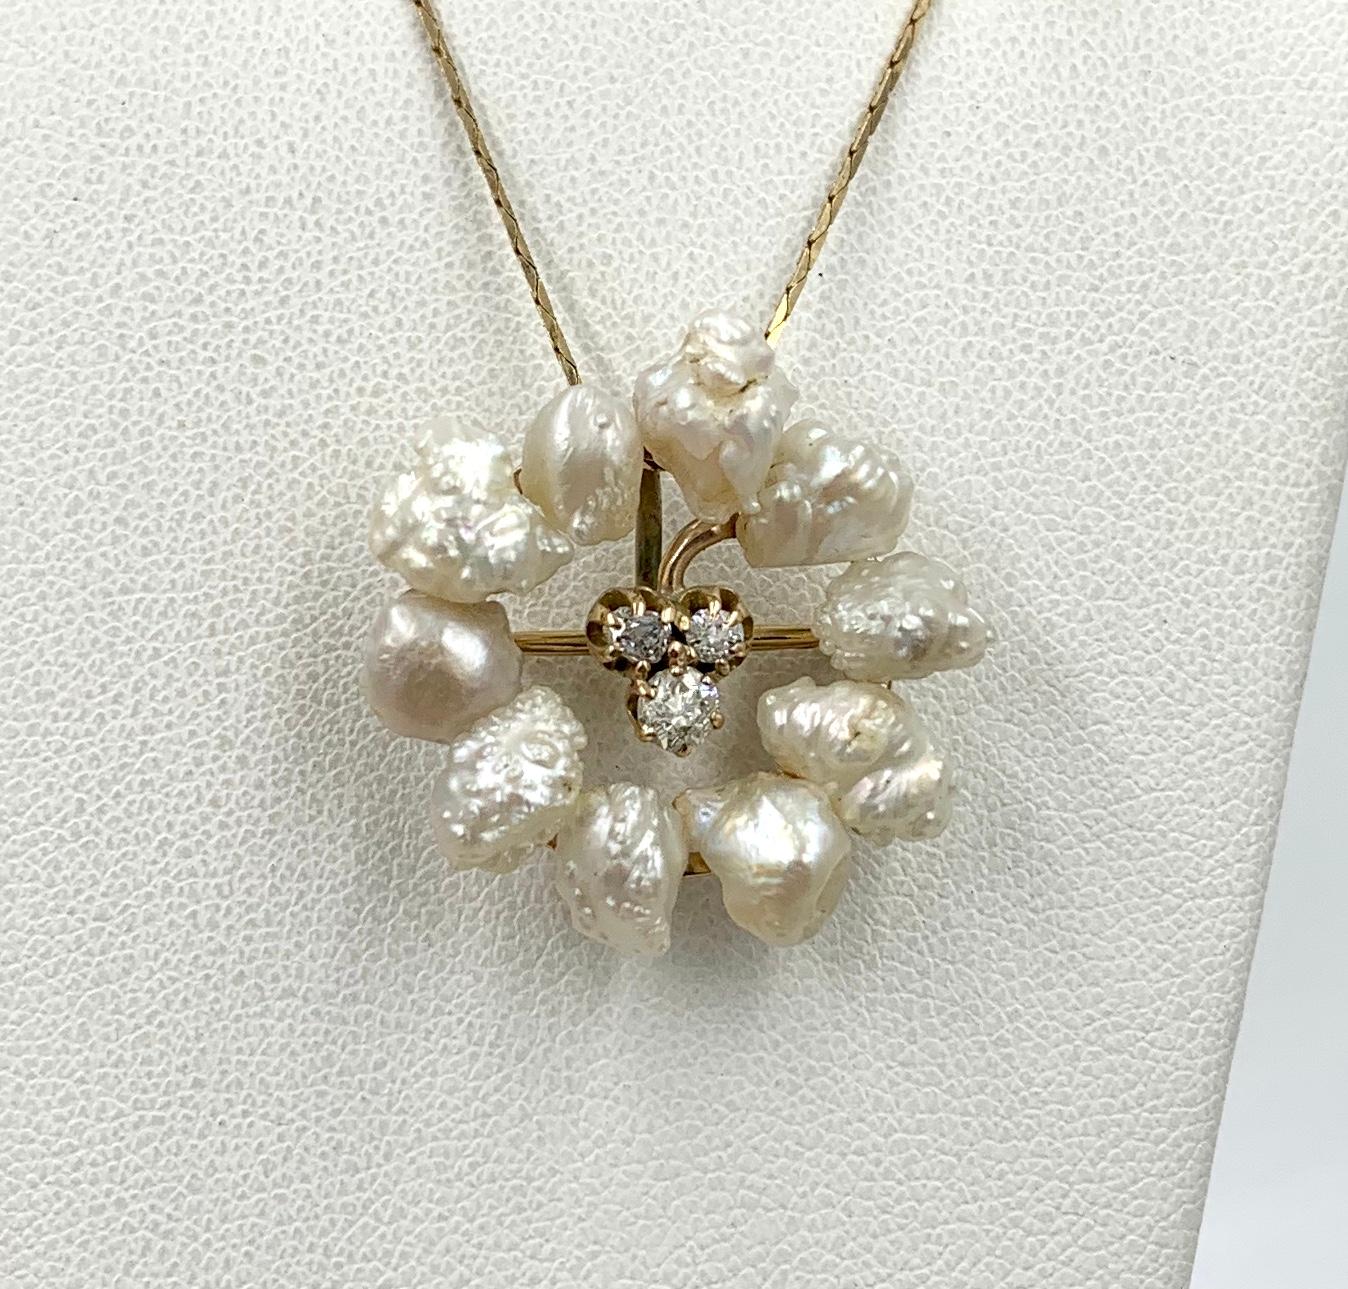 A stunning and very special Victorian - Belle Epoque three leaf Clover Shamrock Pendant with Old Mine Cut Diamonds and spectacular Pearls set in 14 Karat Gold.  In the center of the pendant/brooch is a three leaf clover motif which is set with three